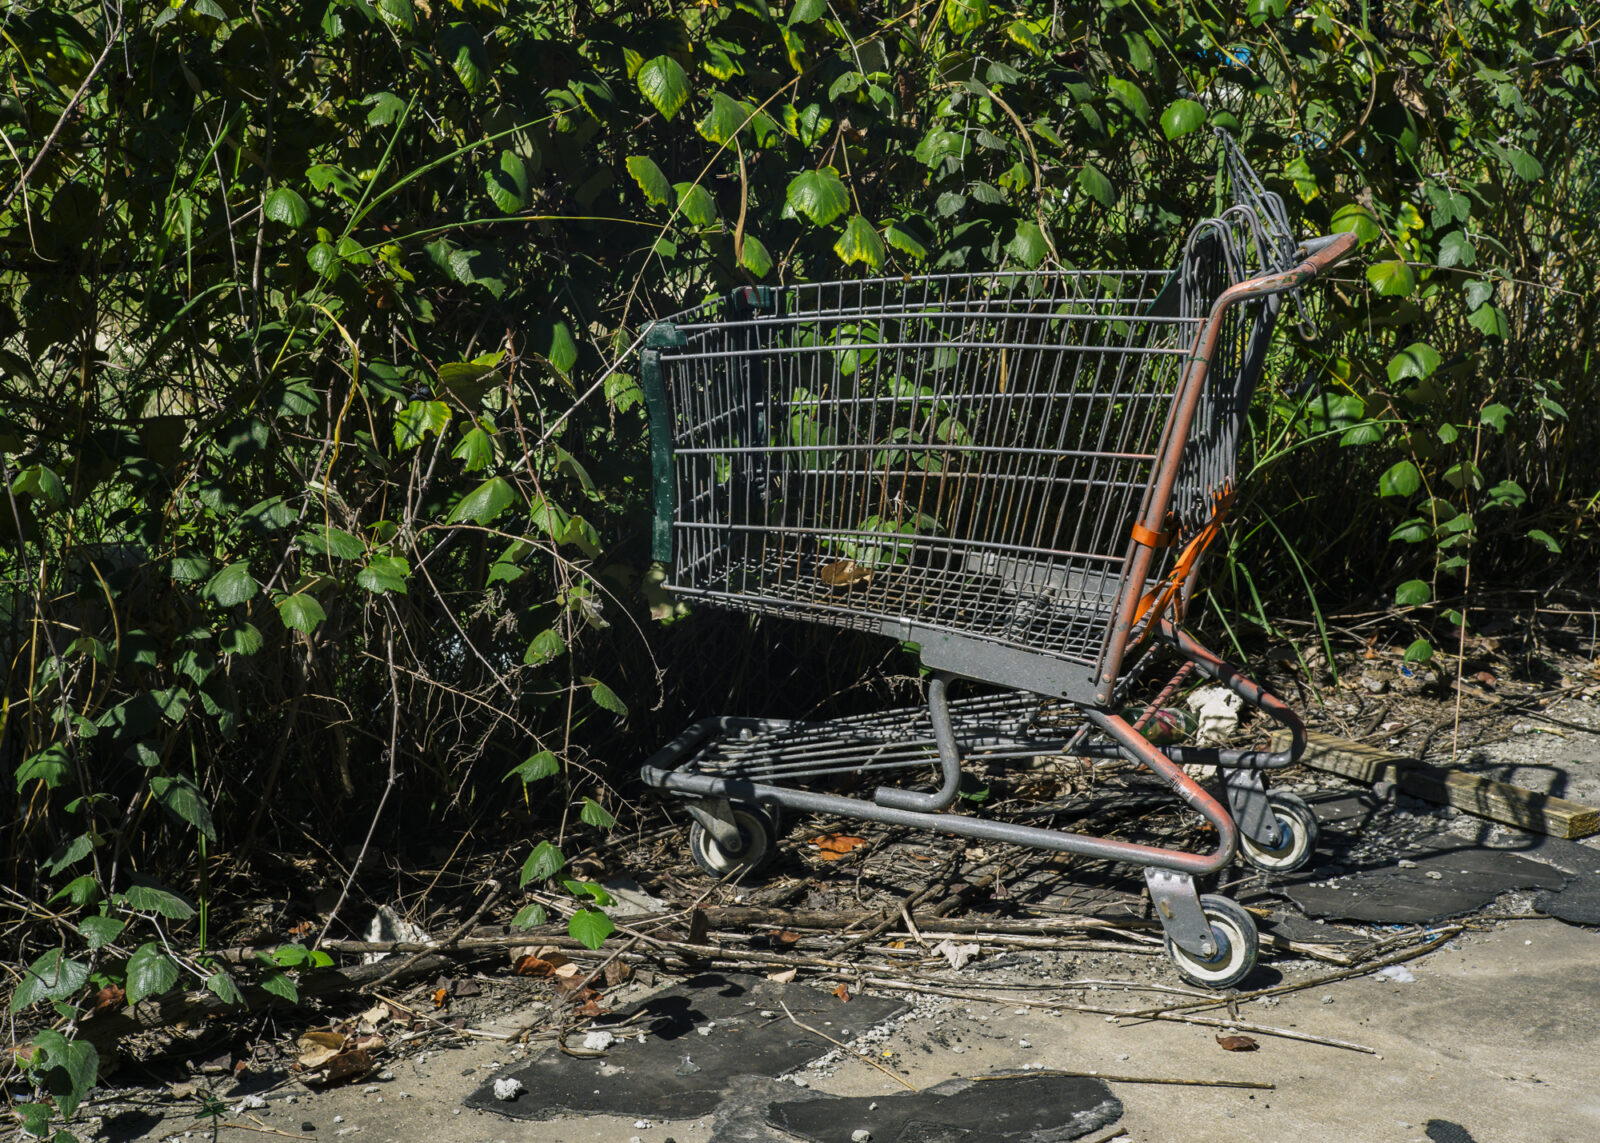 Abandoned shopping cart in Austin